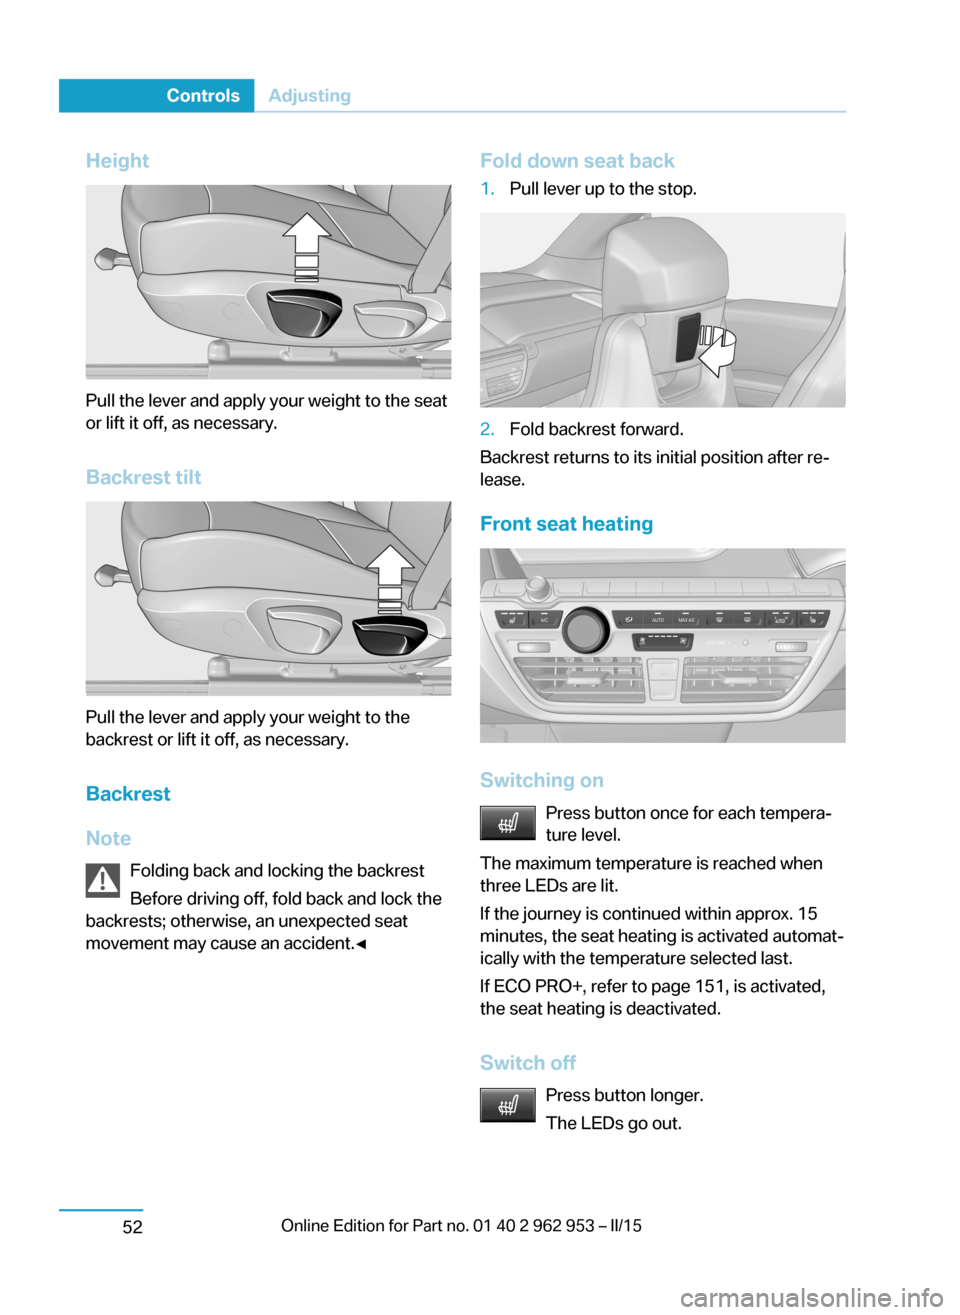 BMW I3 2014 I01 Owners Manual Height
Pull the lever and apply your weight to the seat
or lift it off, as necessary.
Backrest tilt
Pull the lever and apply your weight to the
backrest or lift it off, as necessary.
Backrest
Note Fol